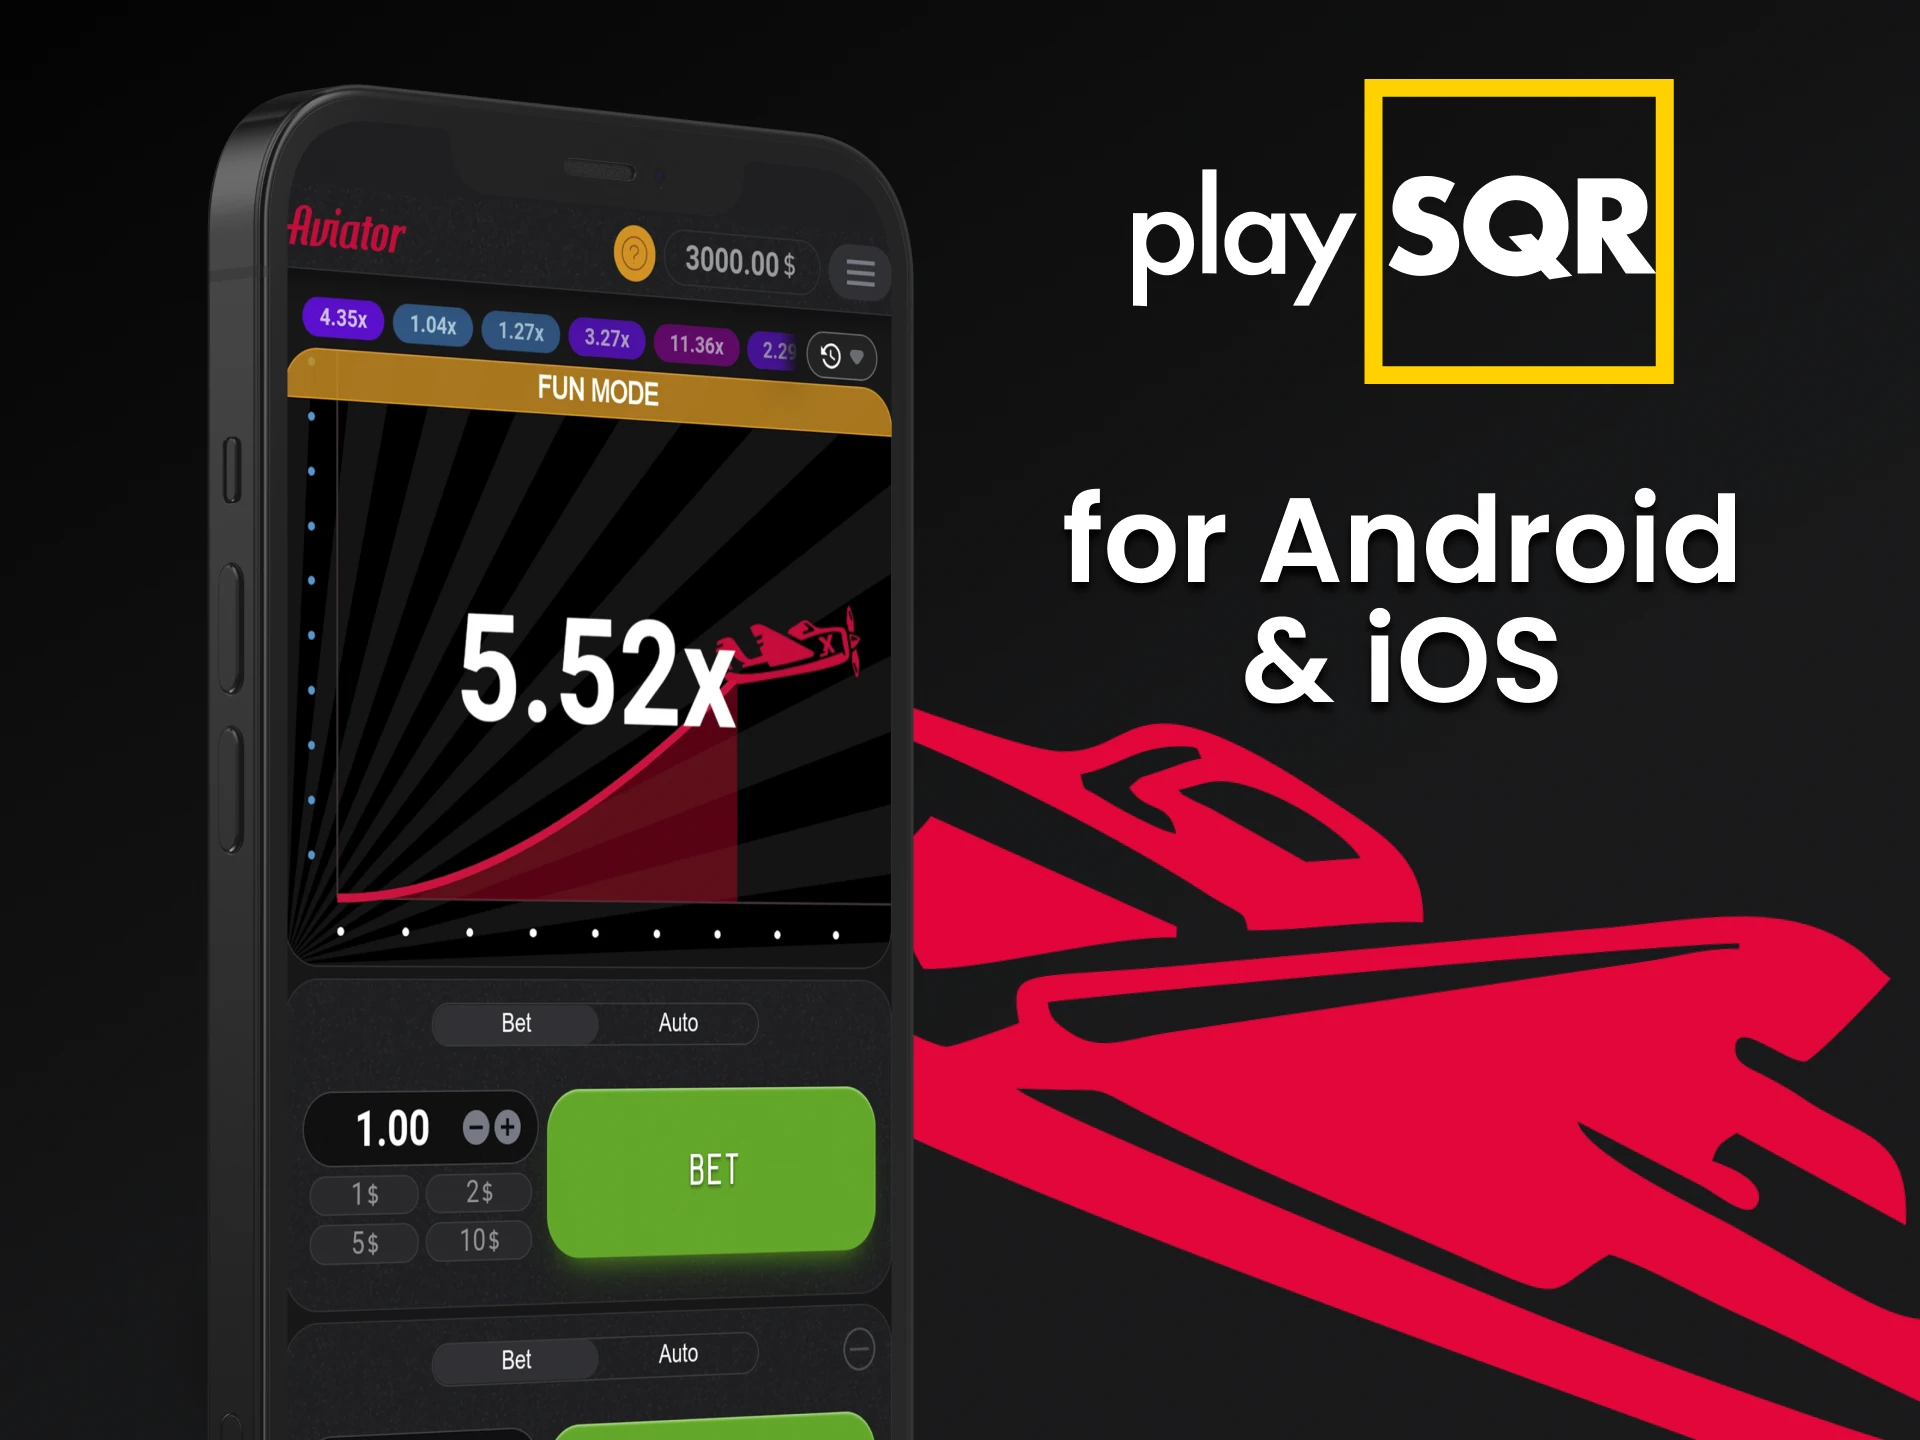 You can play Aviator through the PlaySQR application on your smartphone.